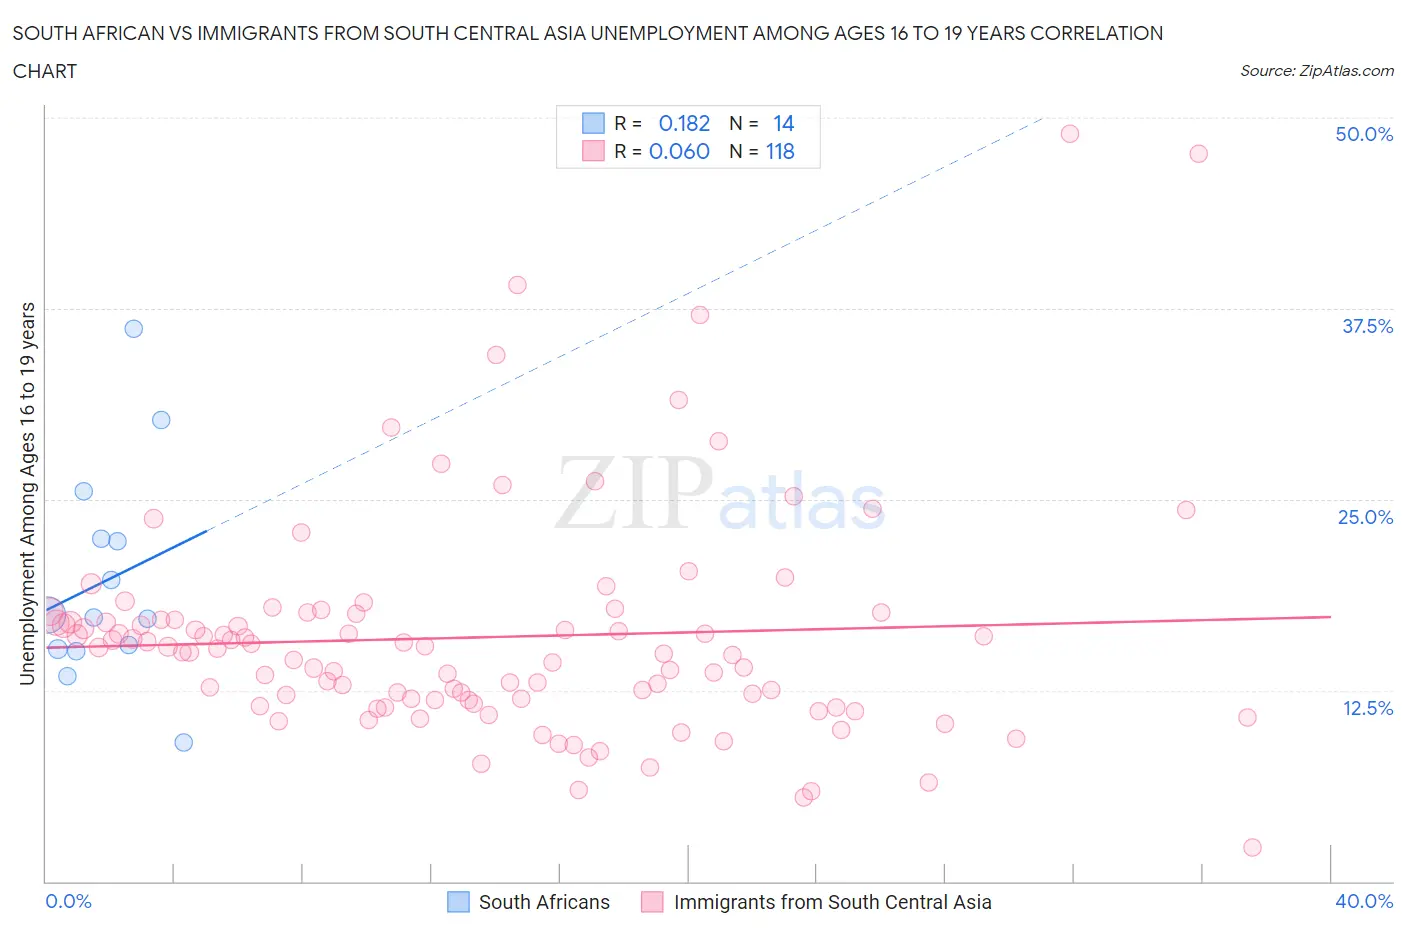 South African vs Immigrants from South Central Asia Unemployment Among Ages 16 to 19 years